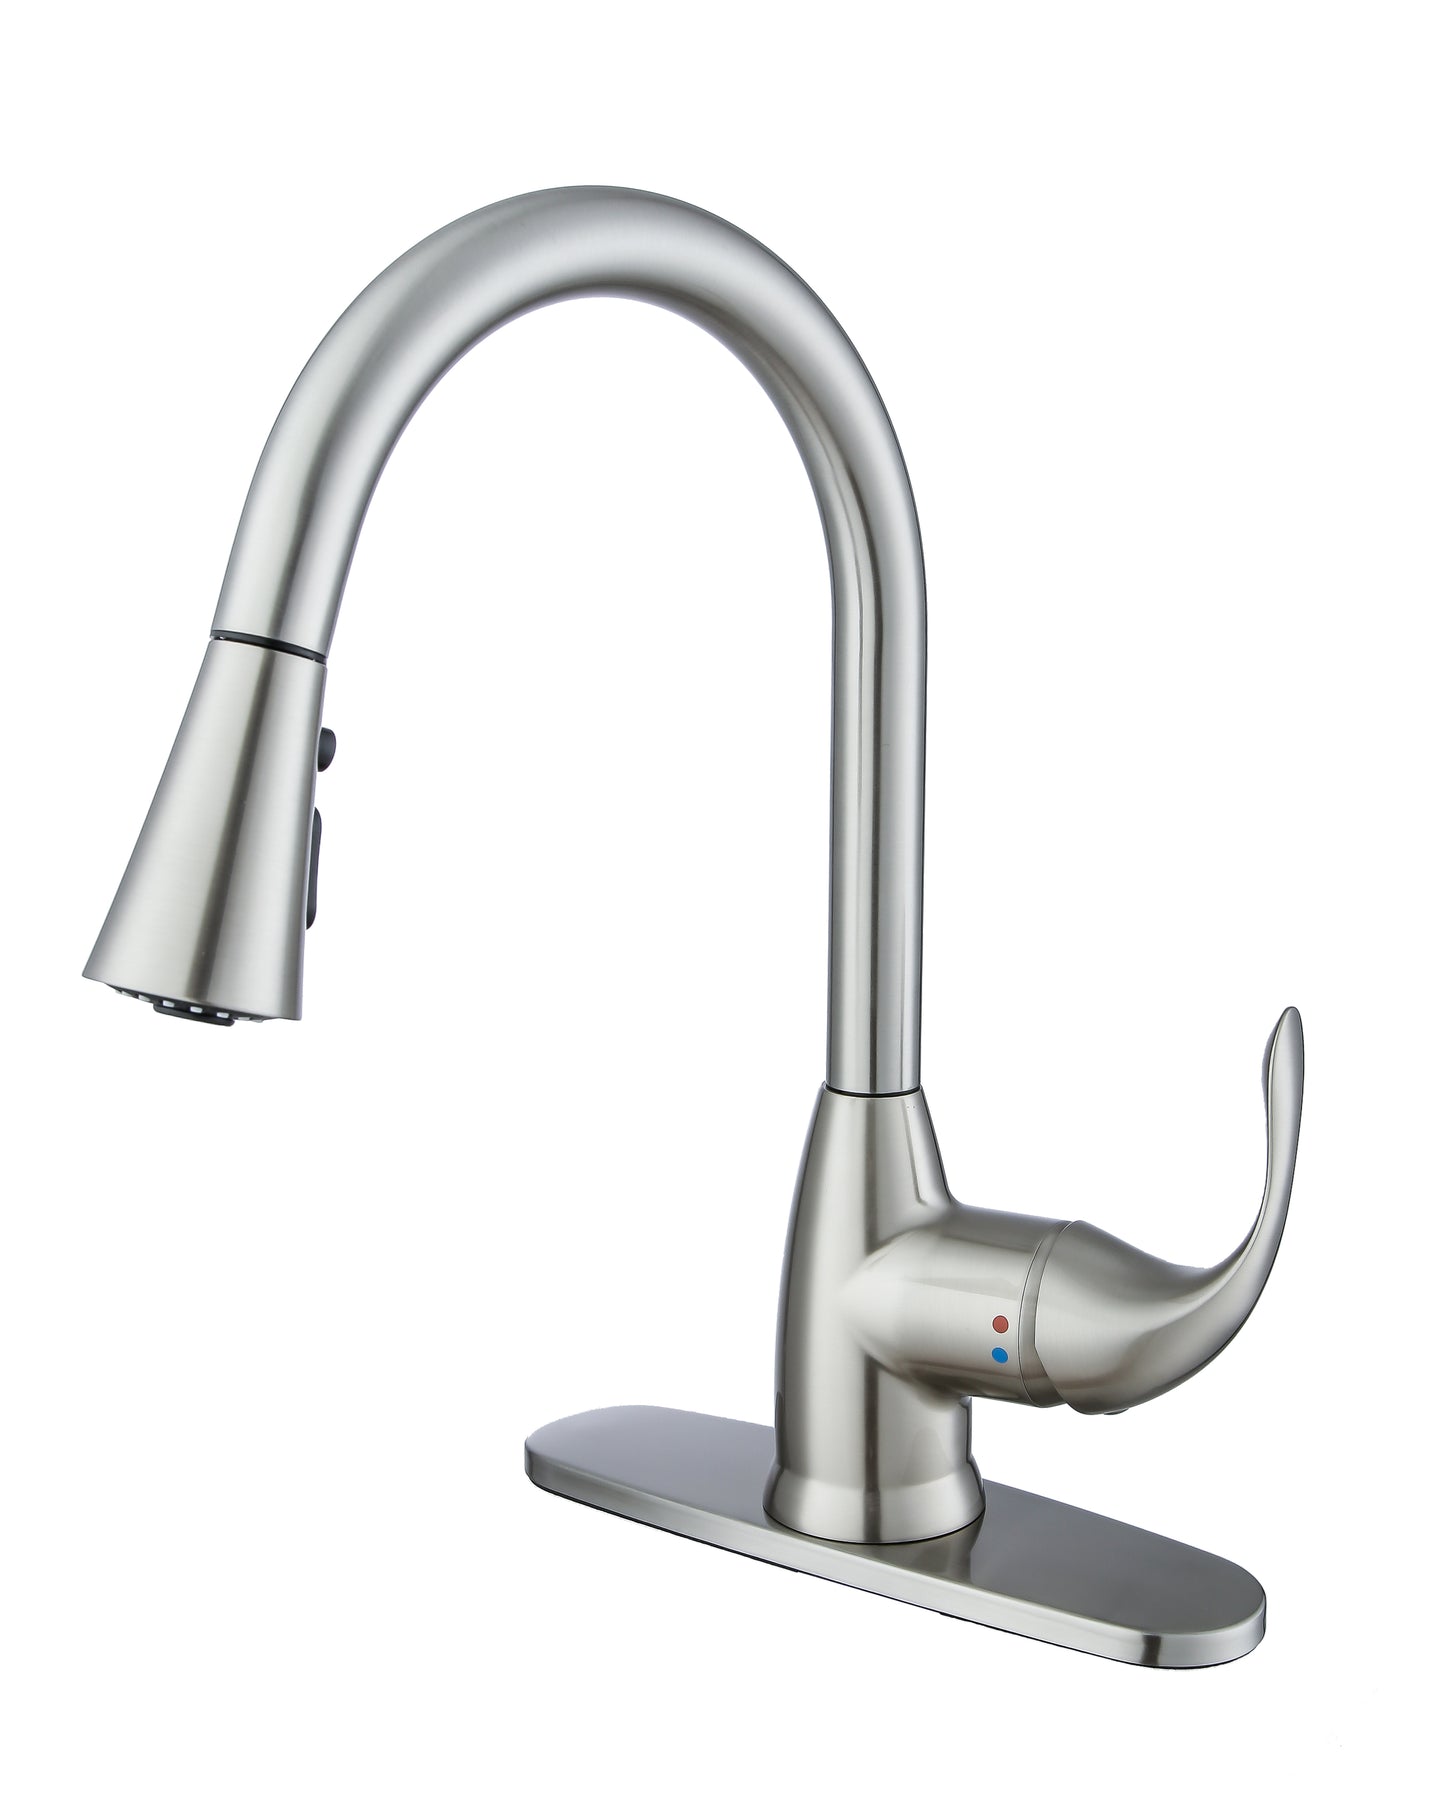 Frigidaire Alexis Single Handle Pull Down Kitchen Sink Faucet